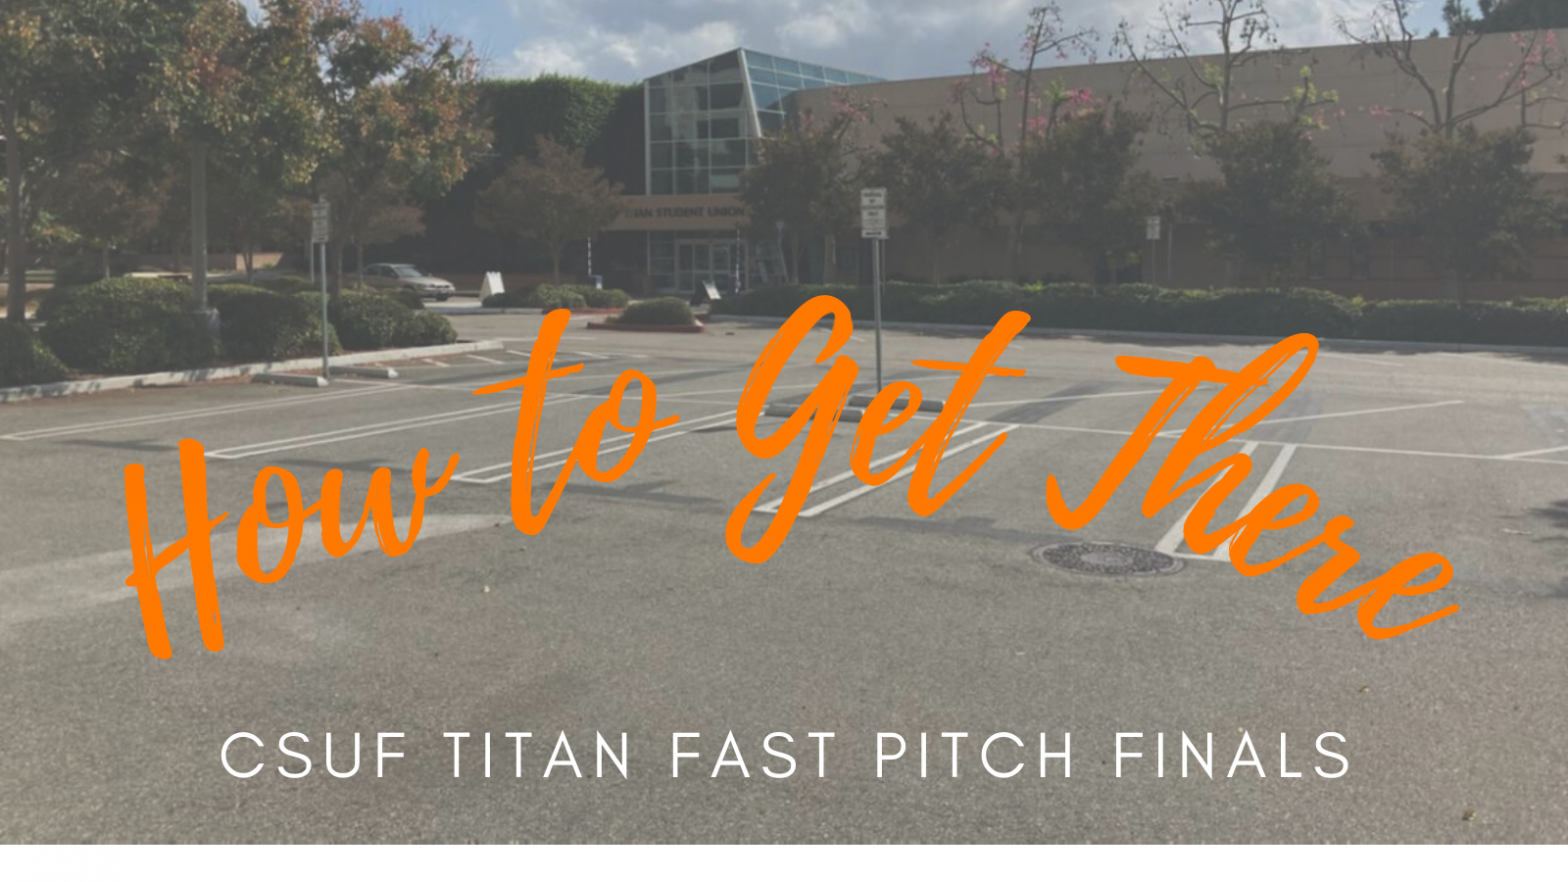 2021 CSUF Titan Fast Pitch Finals – How to Get There